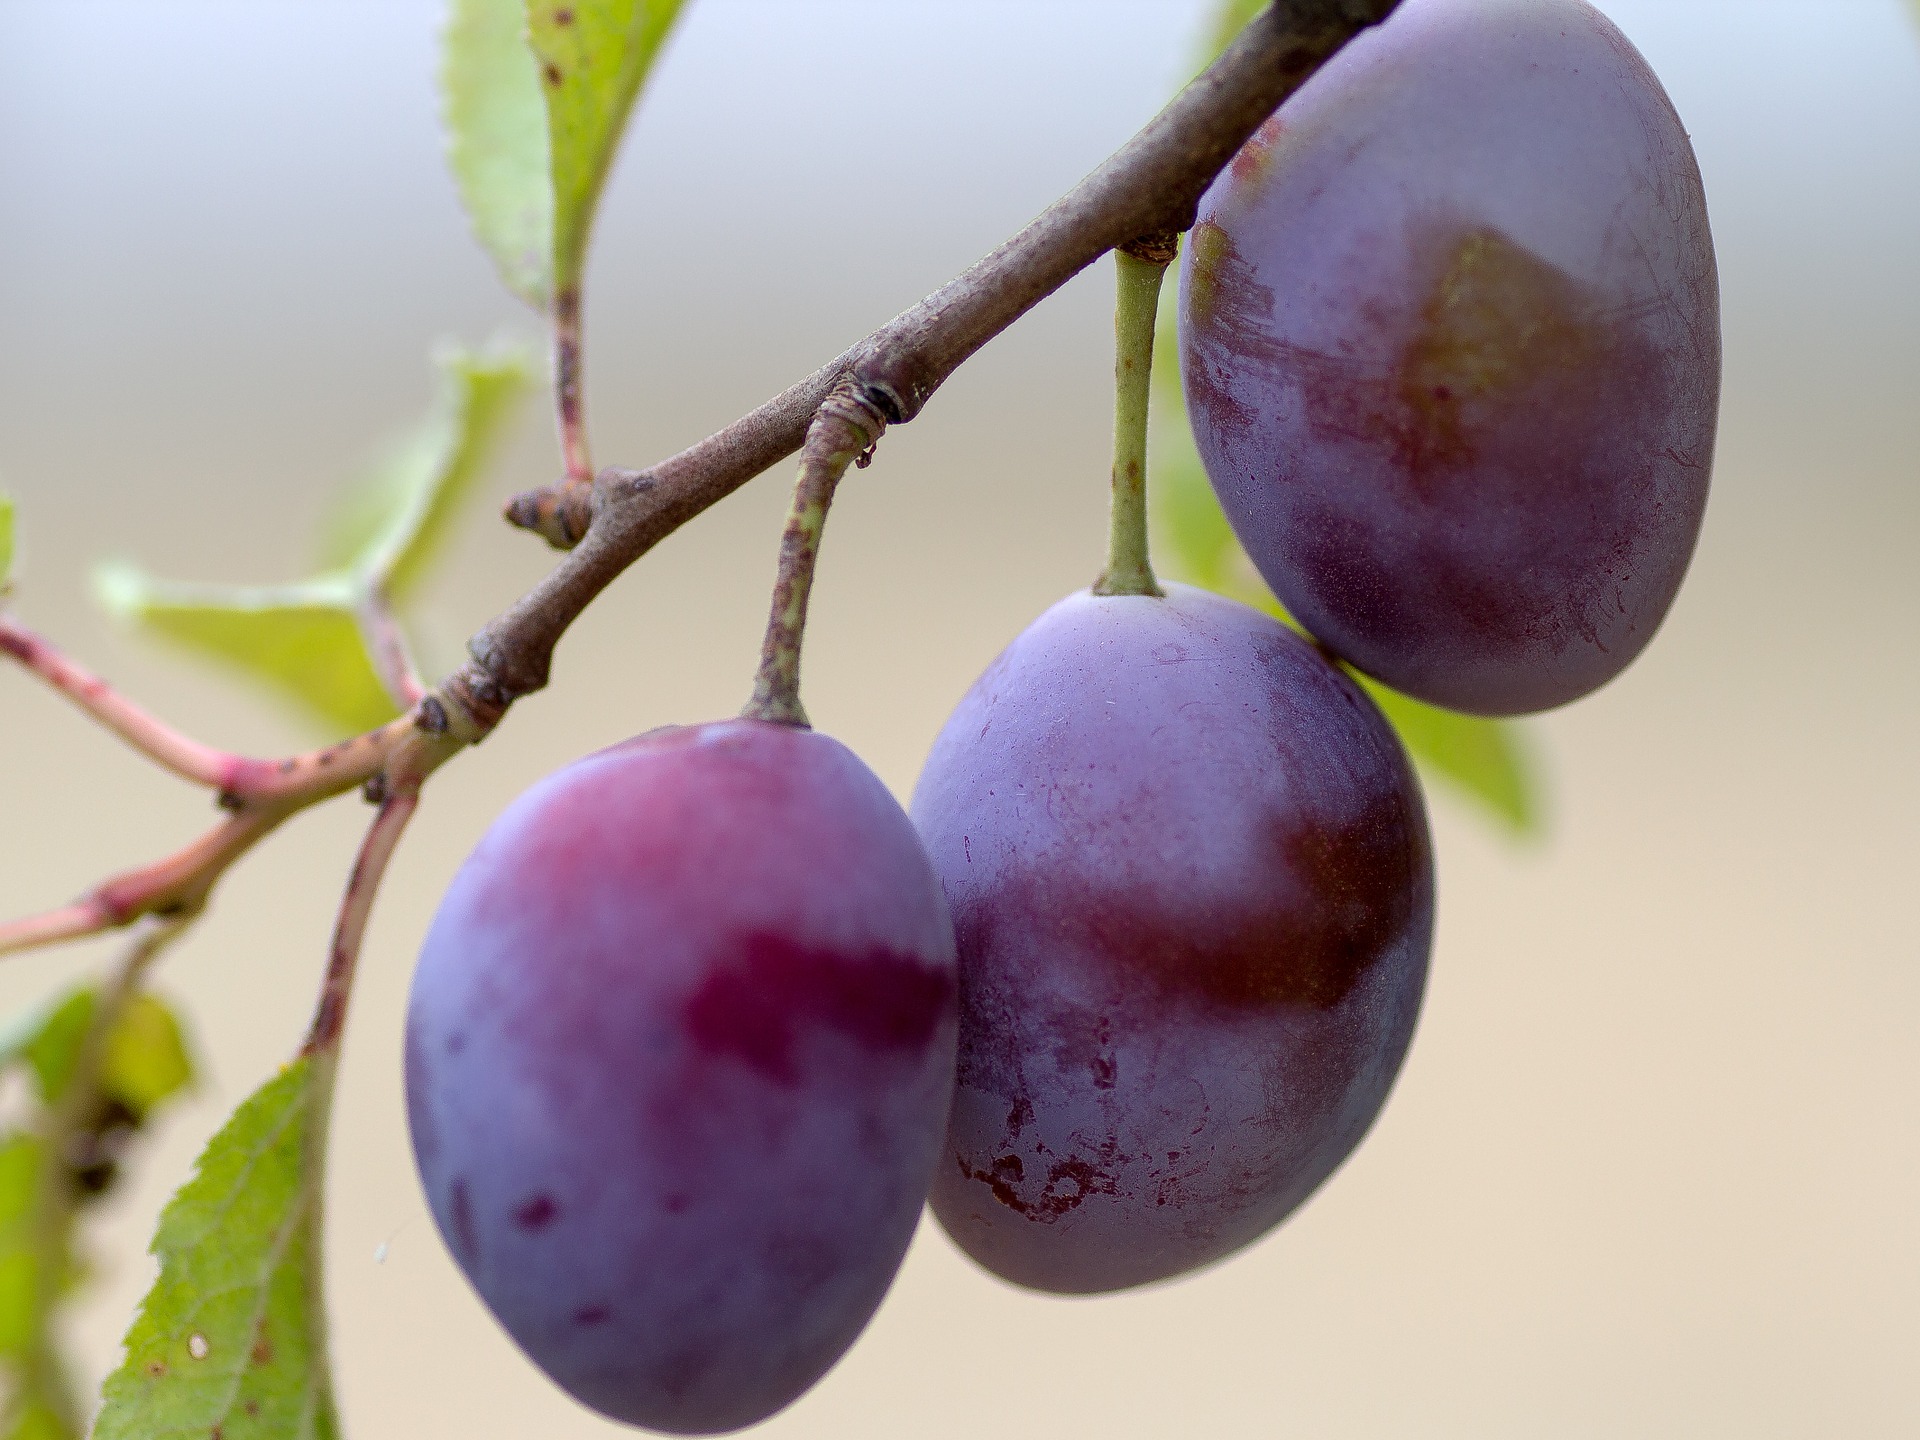 Plums: Planting, Growing, and Harvesting Plums | The Old Farmer's ...